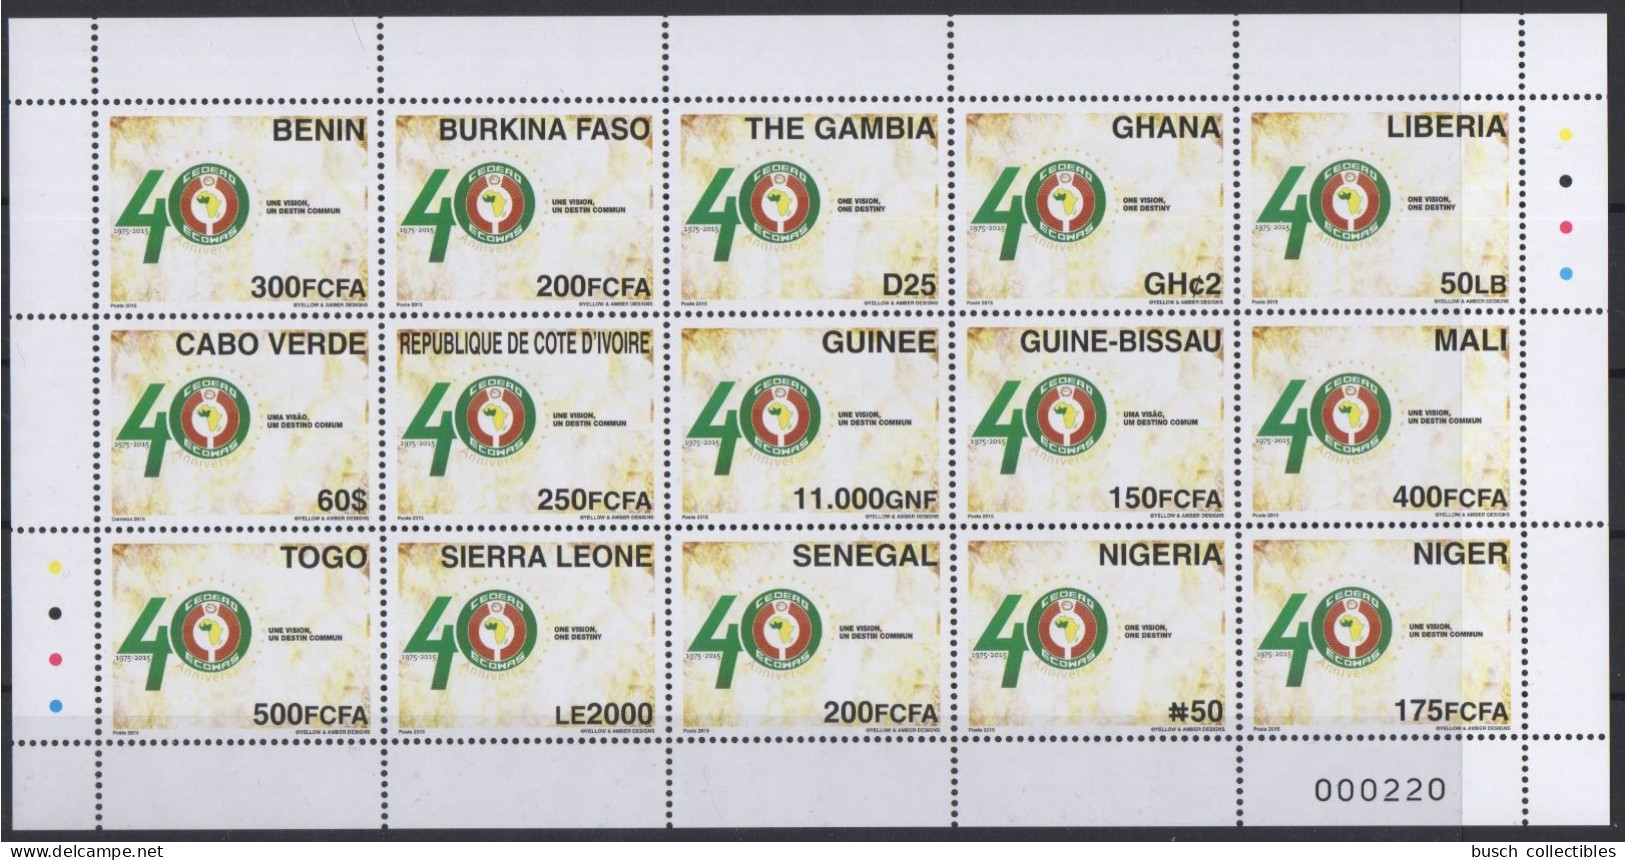 ULTRA RARE Feuille 15 Pays 15 Countries Sheet 15 Länder 2015 Emission Commune Joint Issue CEDEAO ECOWAS 40 Ans 40 Years - Cap Vert